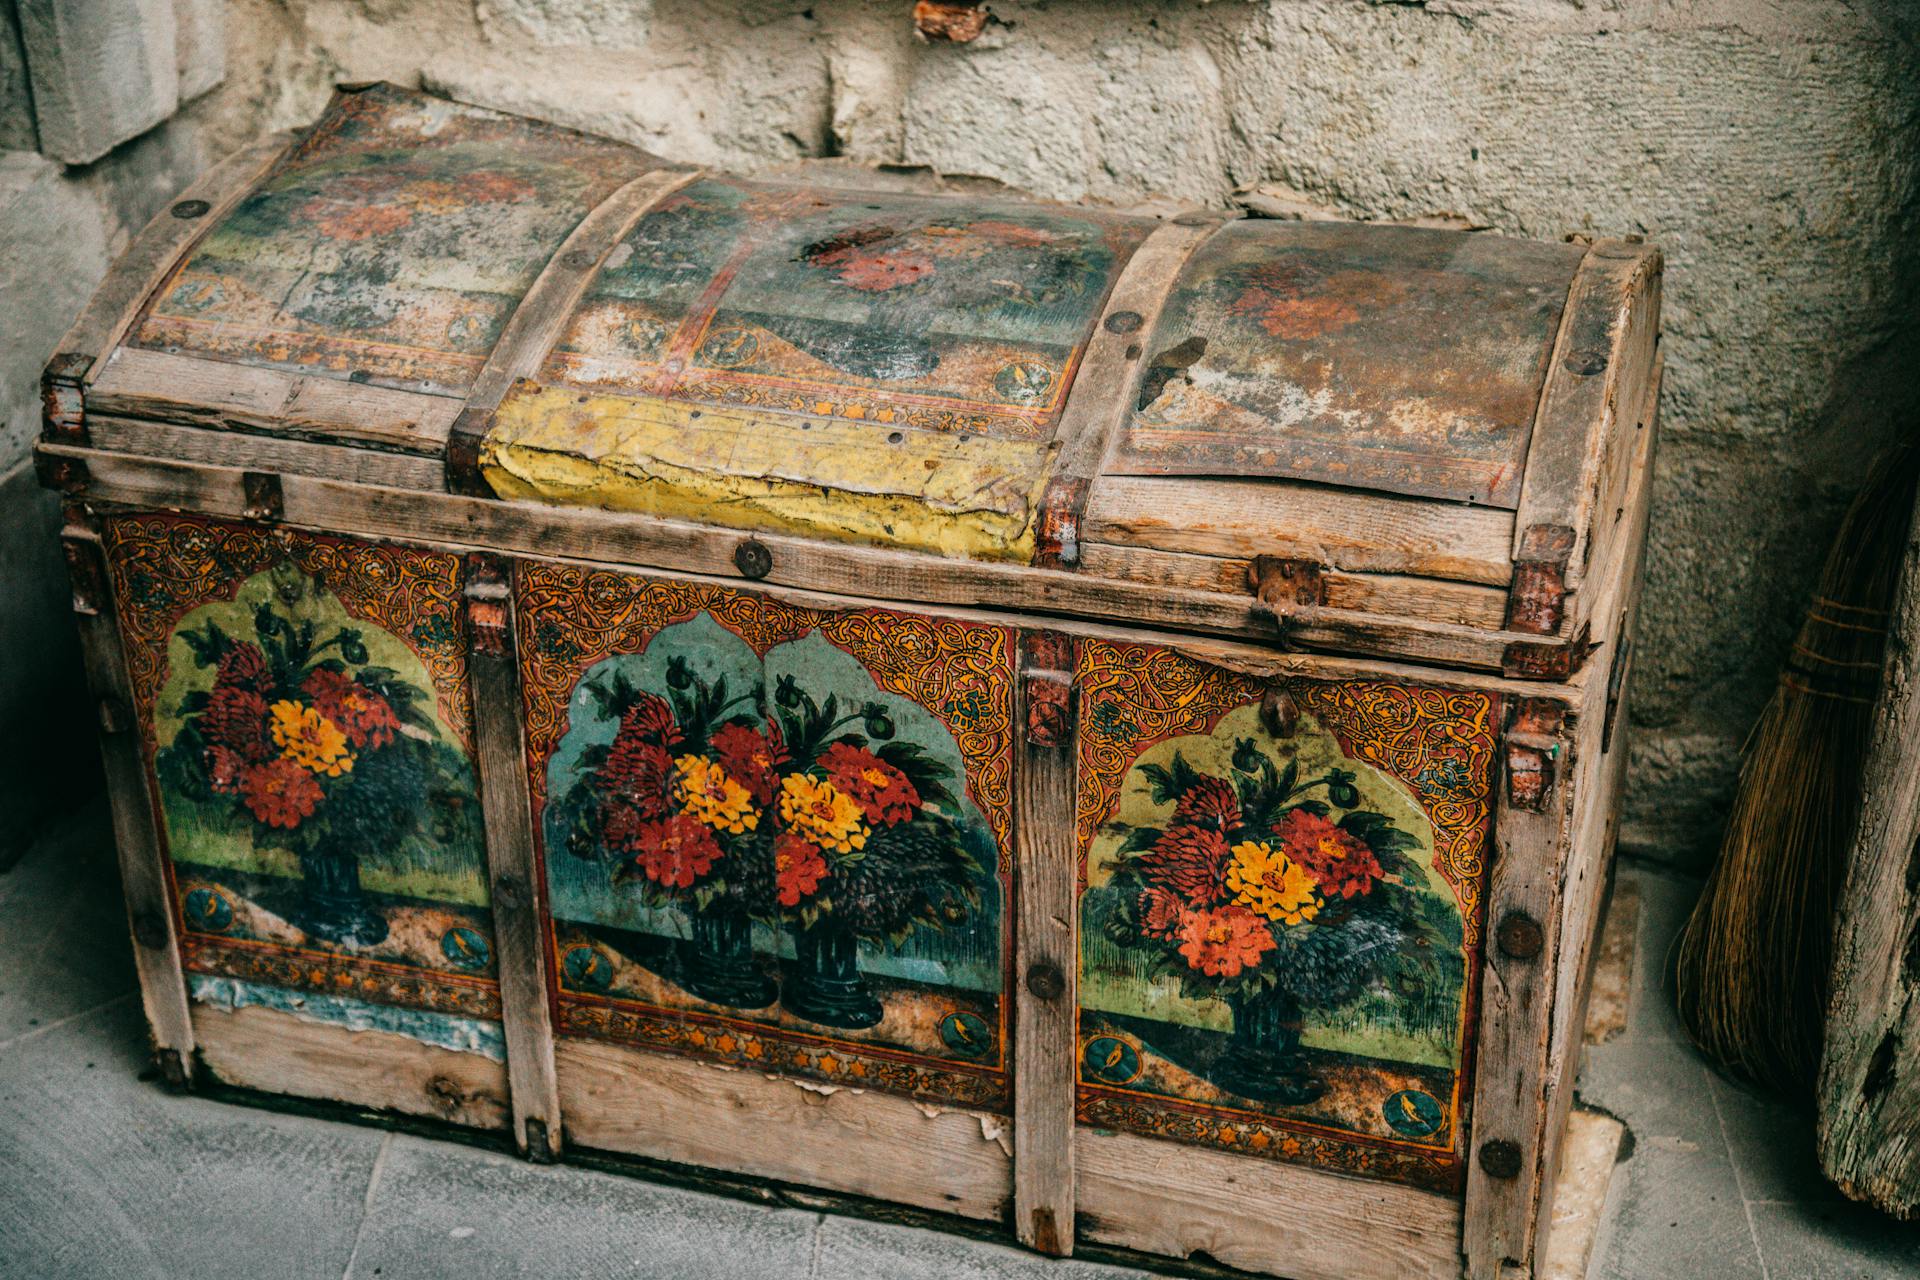 An ornamental old chest on the ground | Source: Pexels